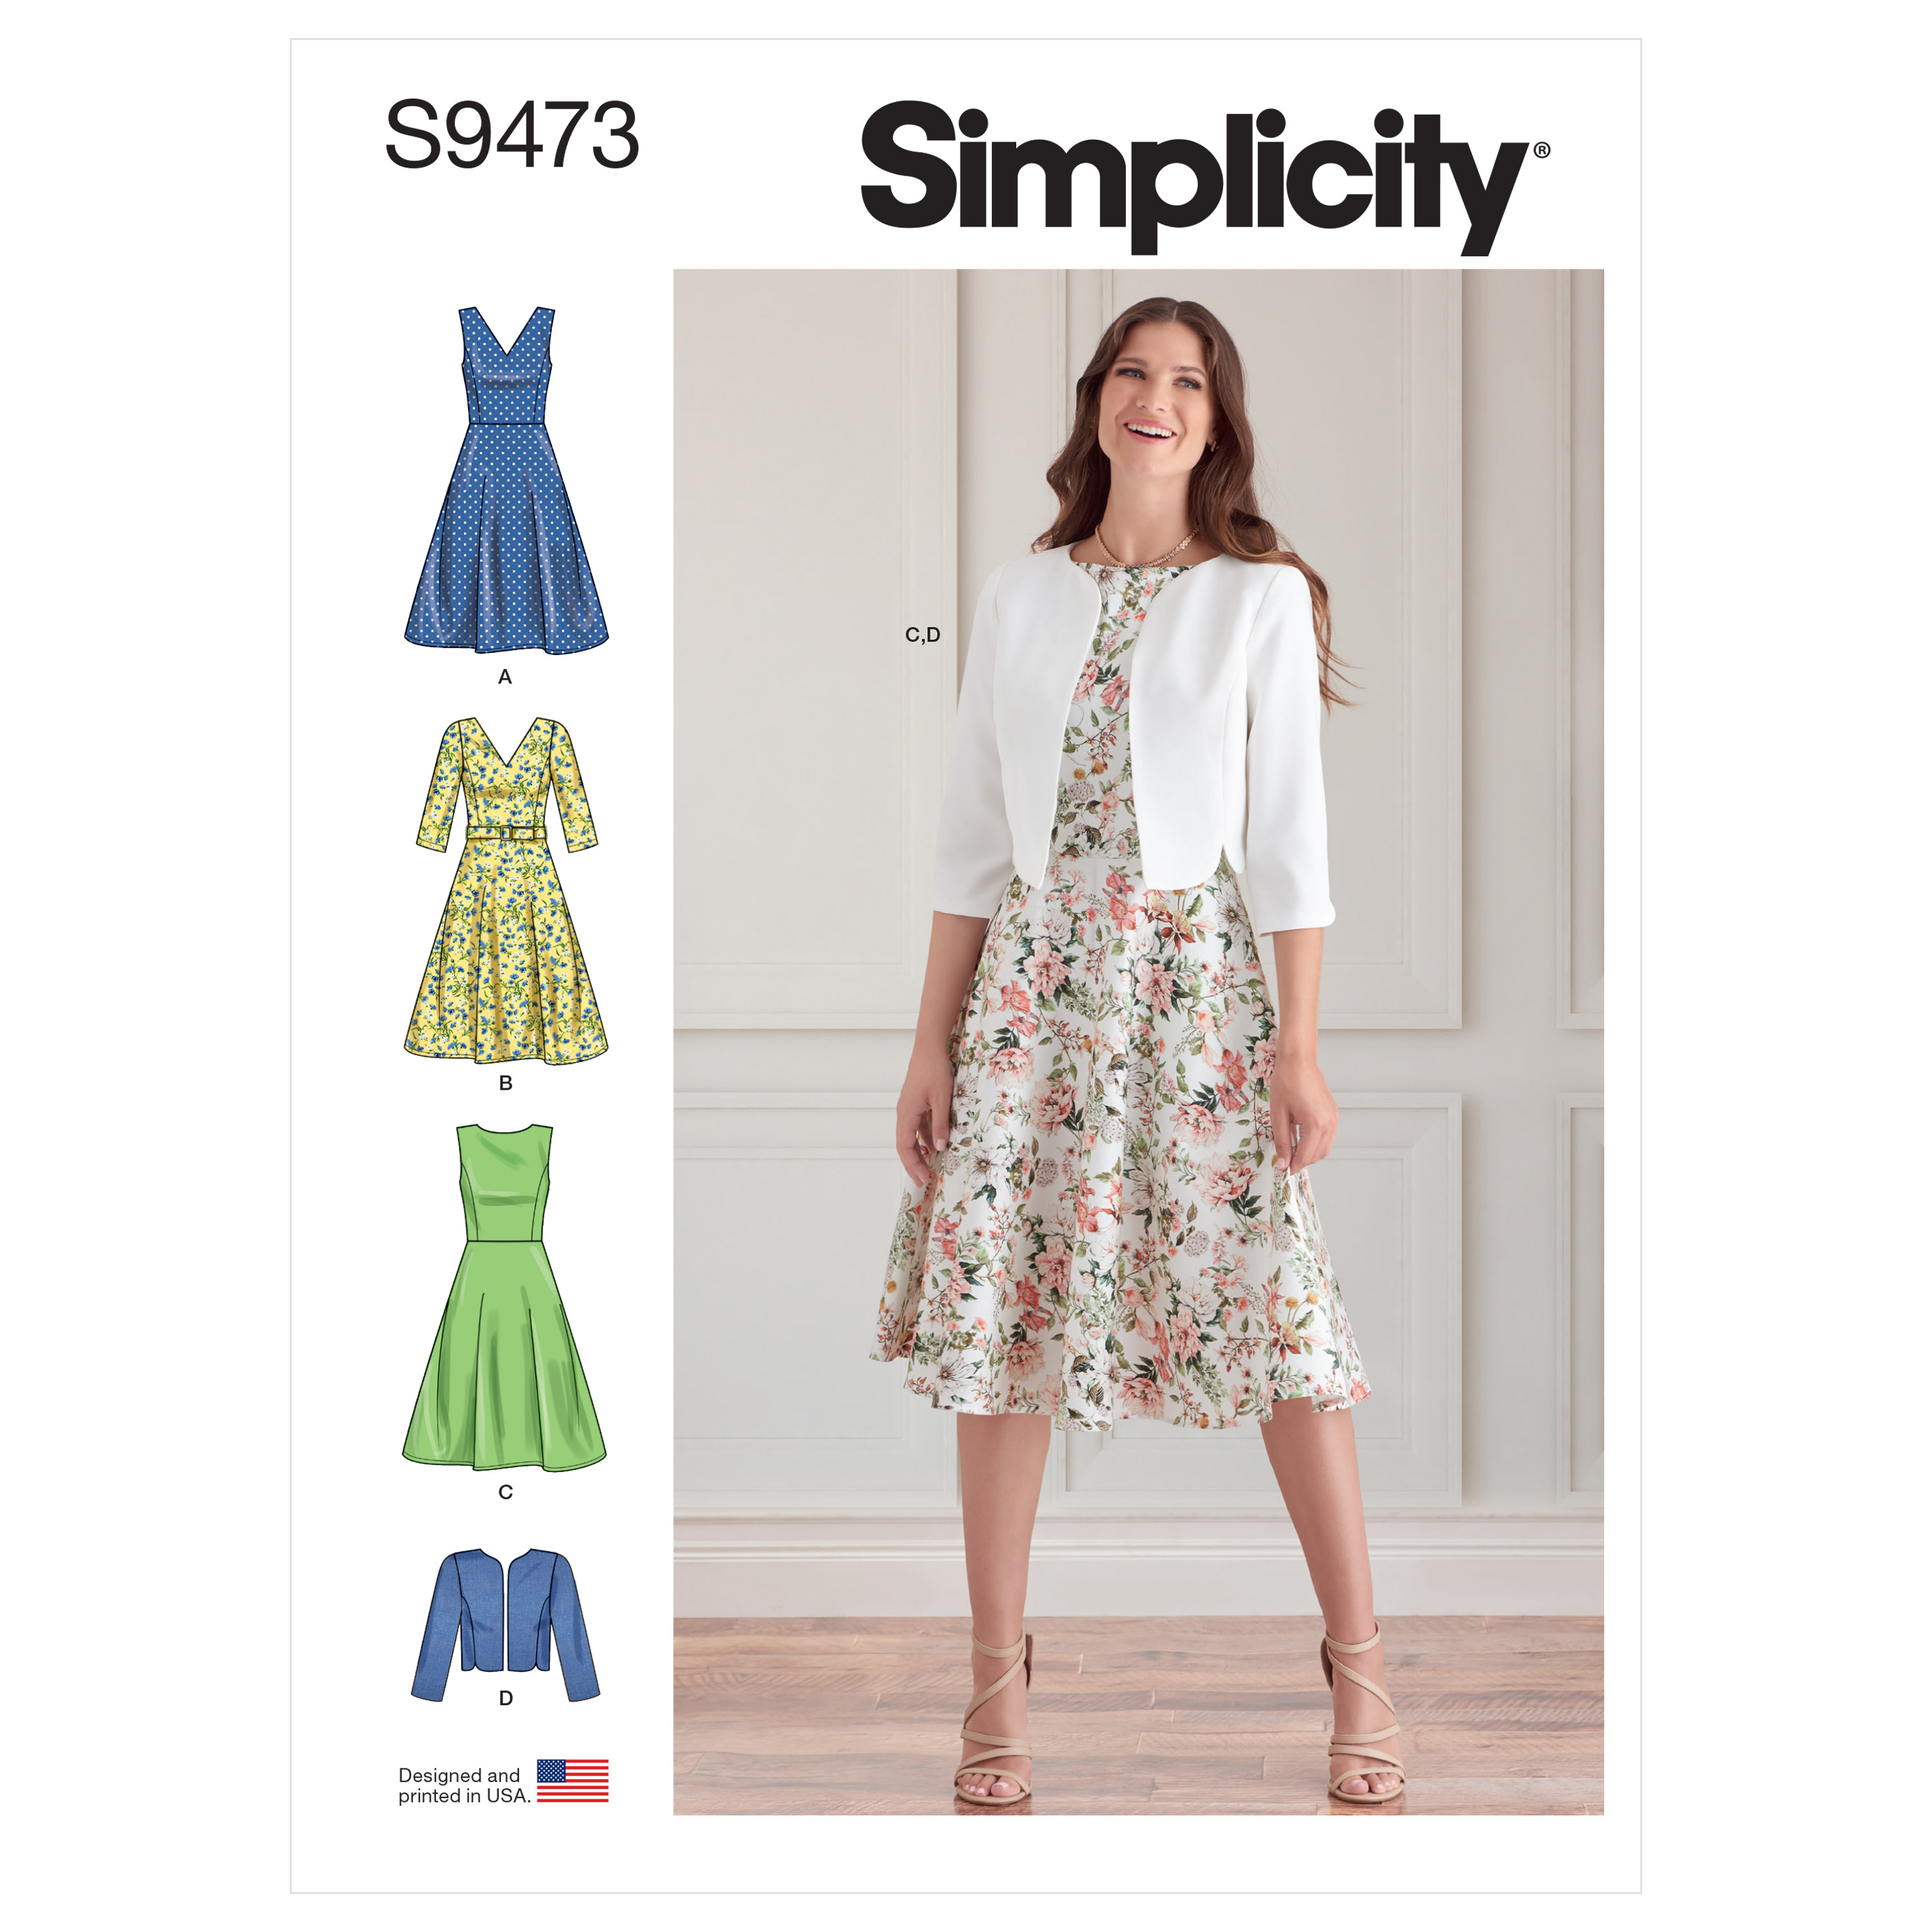 Simplicity 9473 Misses' Dresses and Jacket